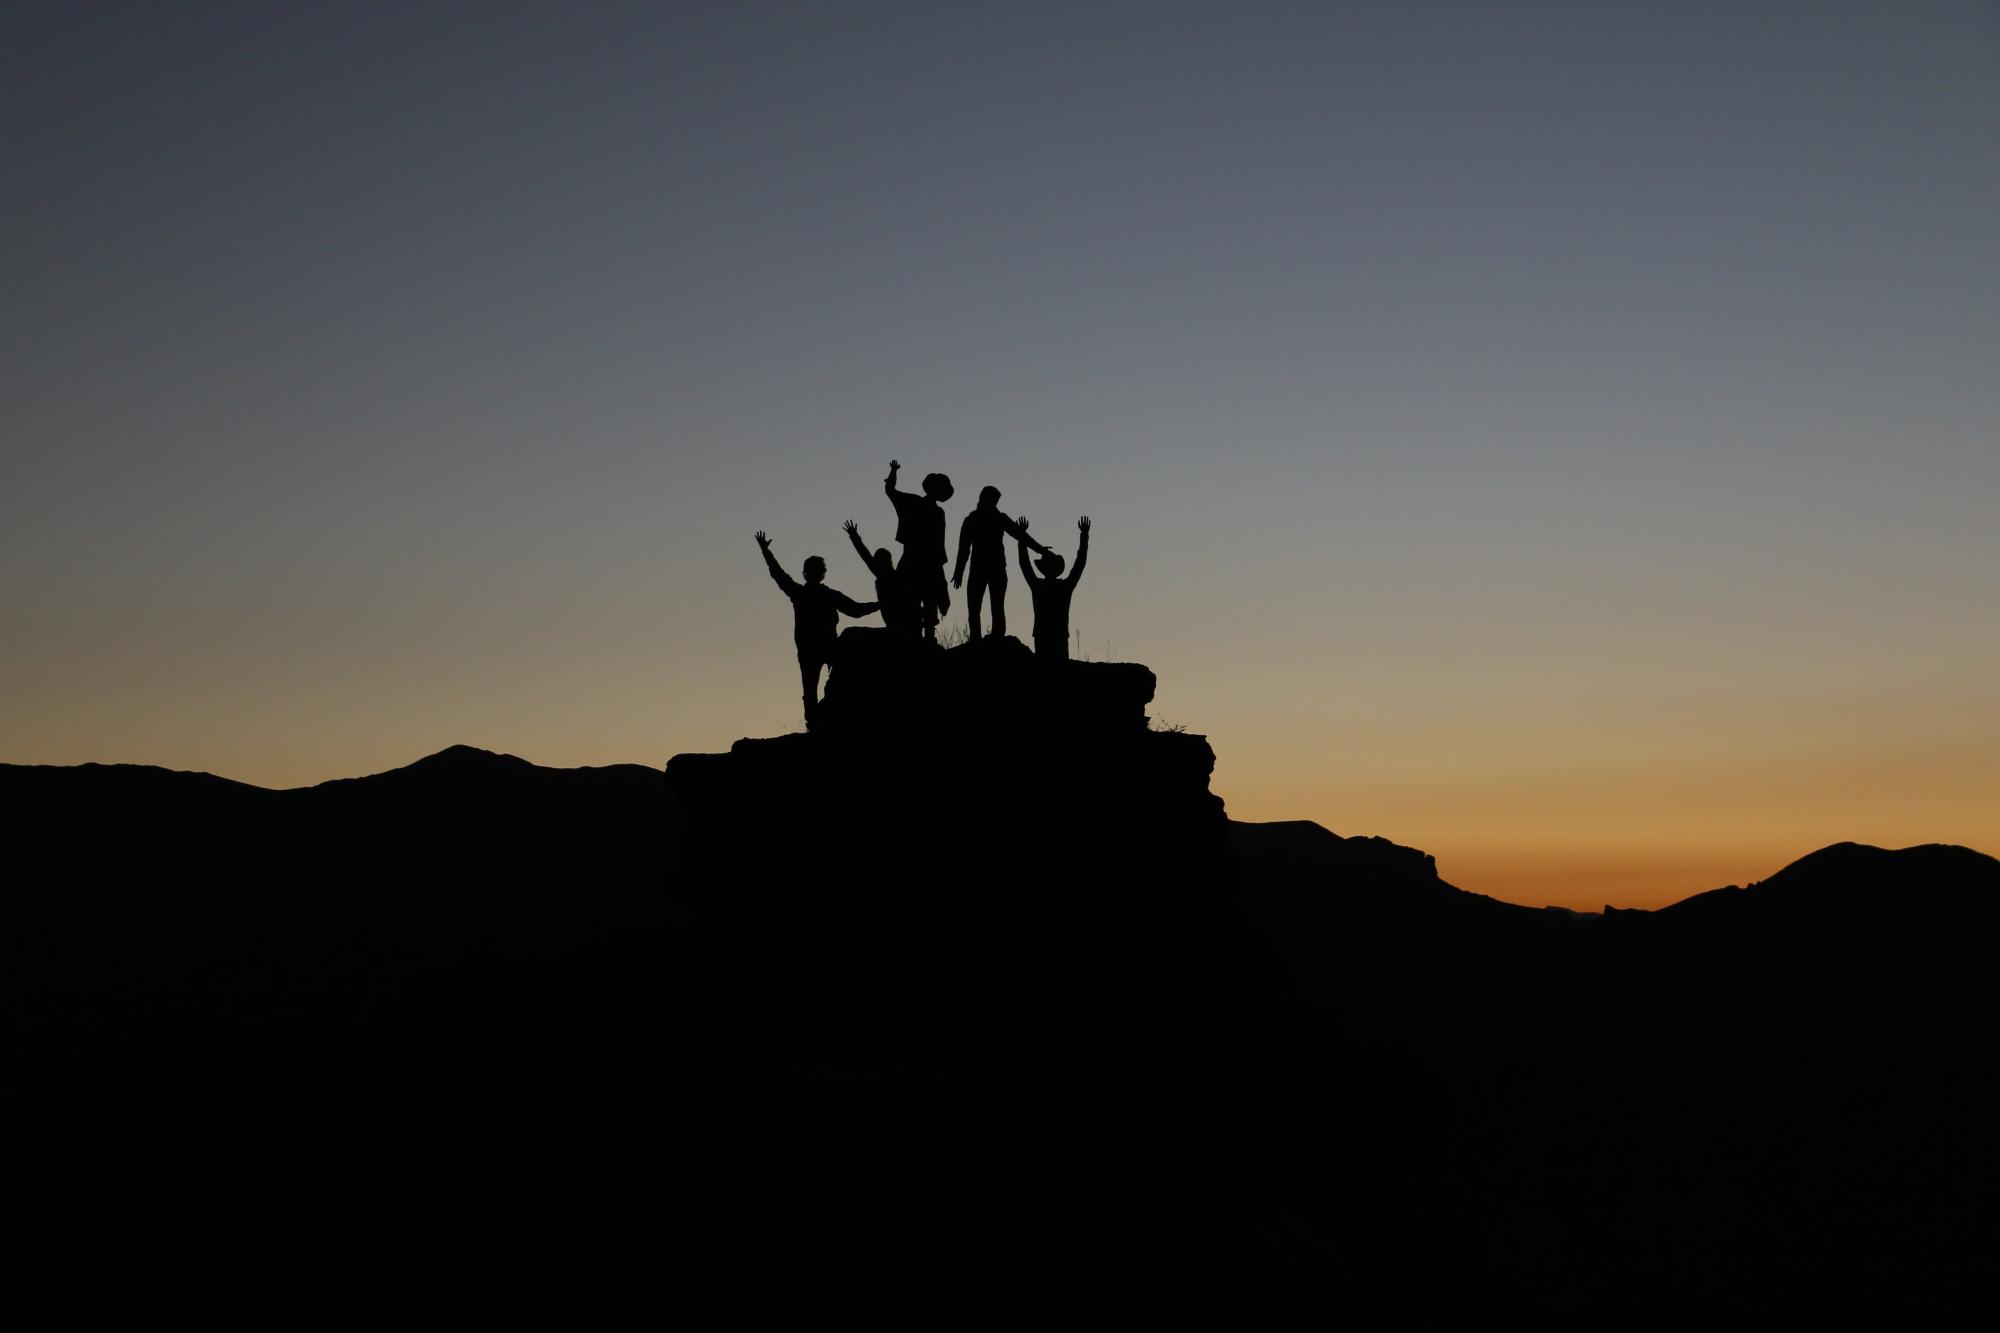 Silhouette of people posing on top of a rocky landscape